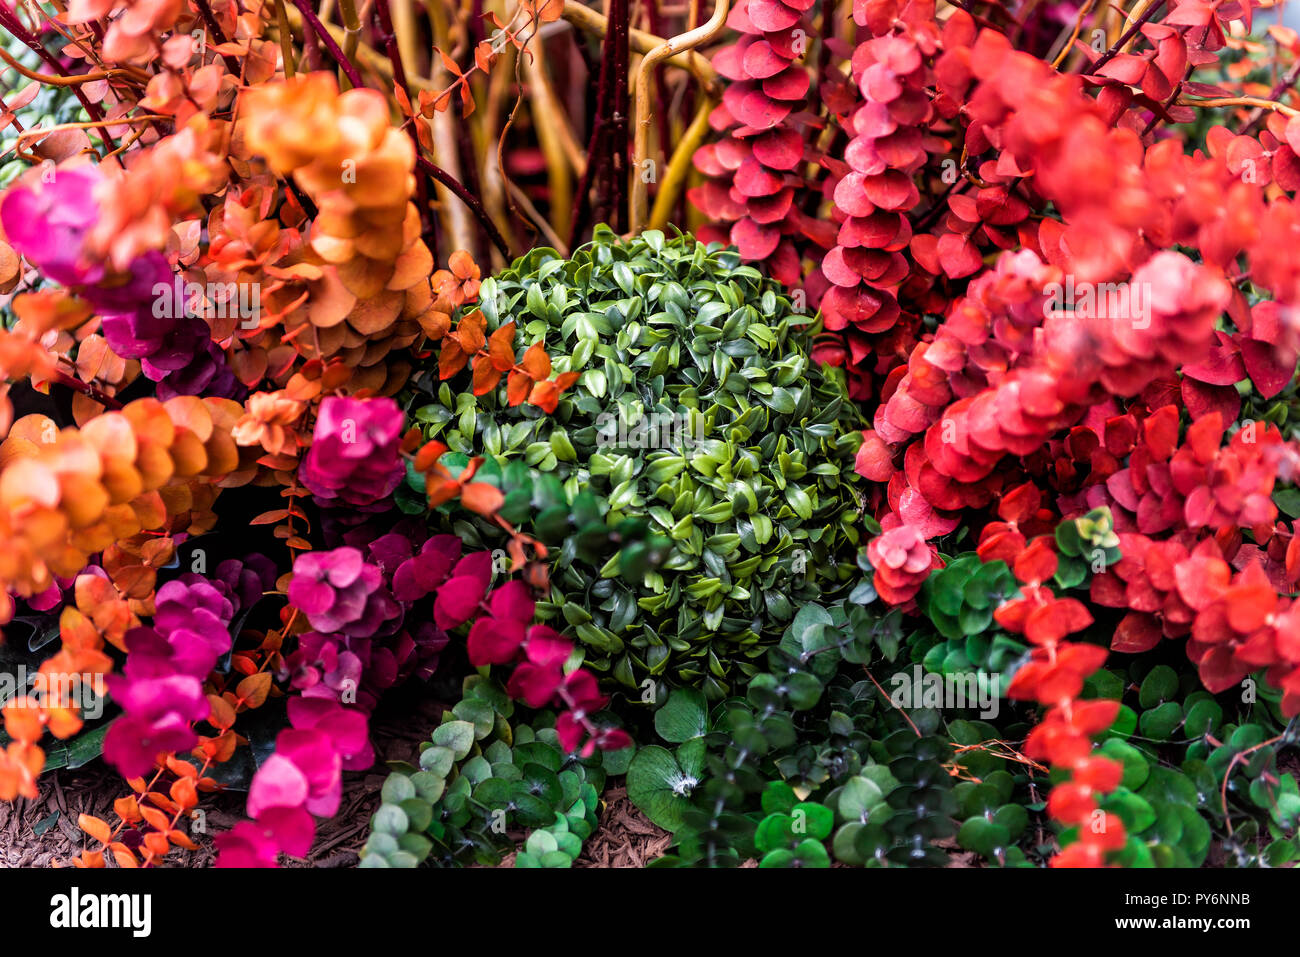 Large flower pot decoration closeup with many colorful multicolored red, orange, pink and purple creeping jenny plant leaves long Stock Photo